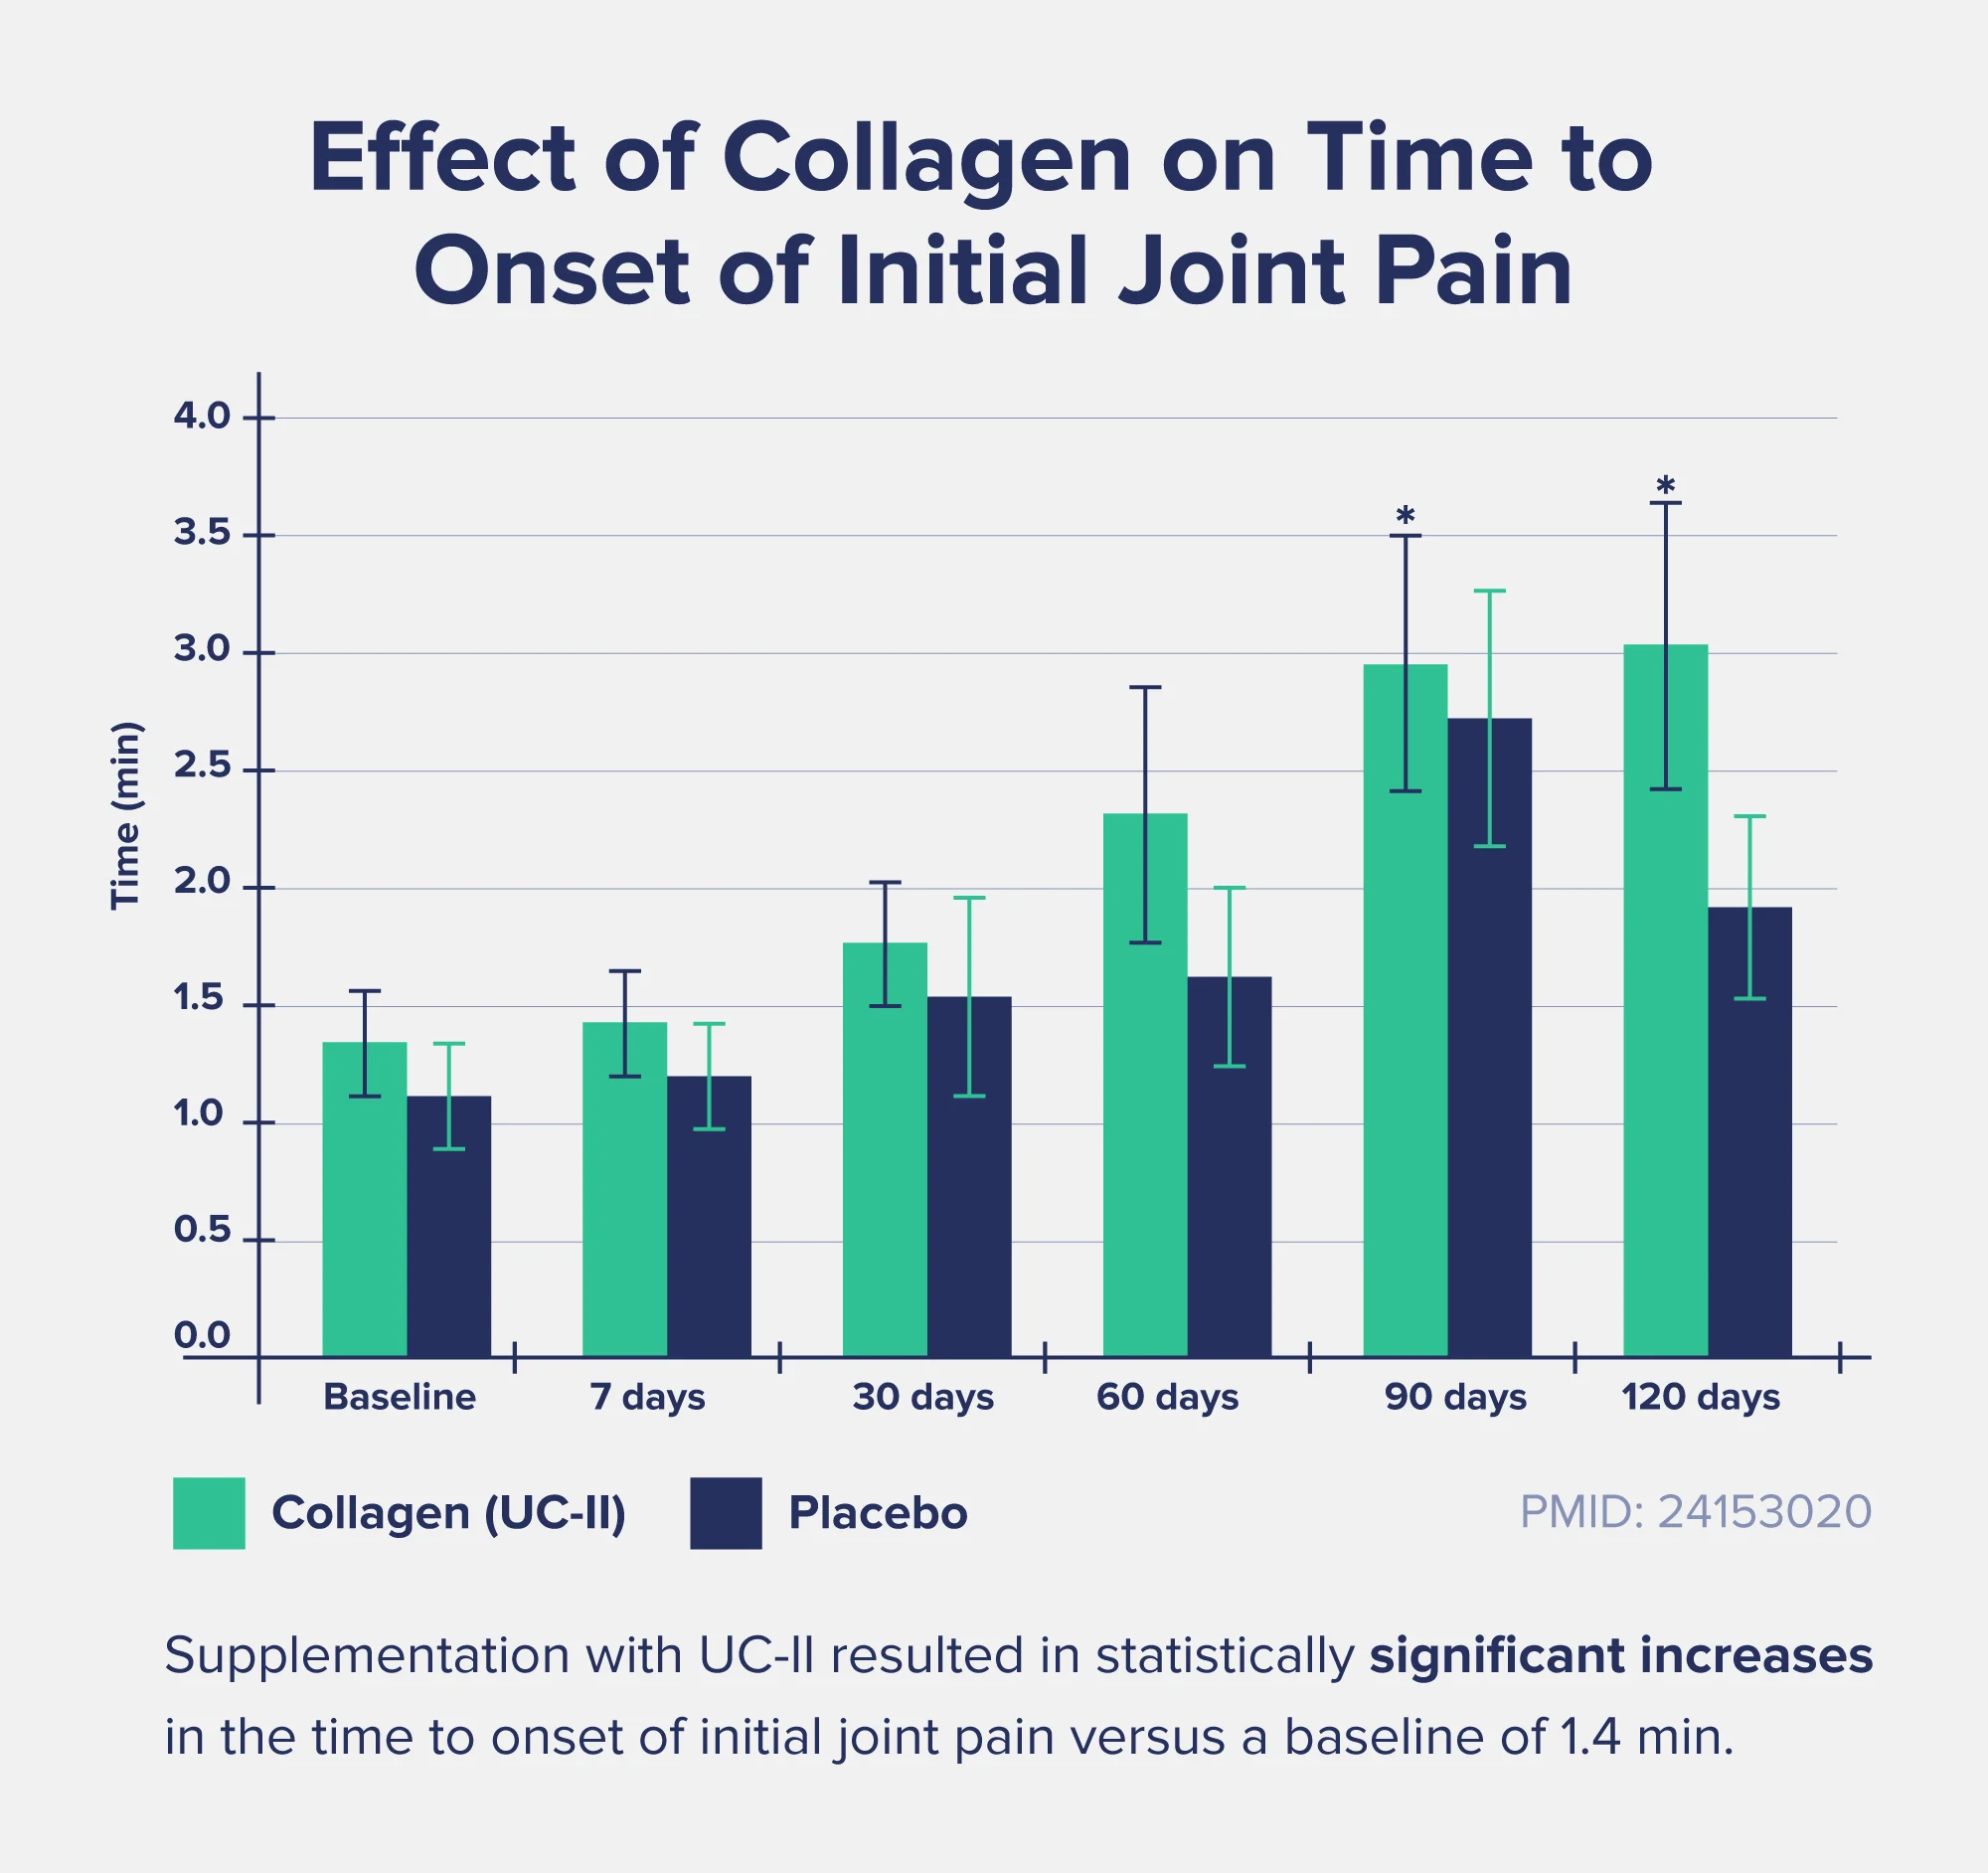 A bar graph entitled "Effect of Collagen on Time to Onset of Initial Joint Pain" showing this relationship across several benchmarks within a 120-day trial period.